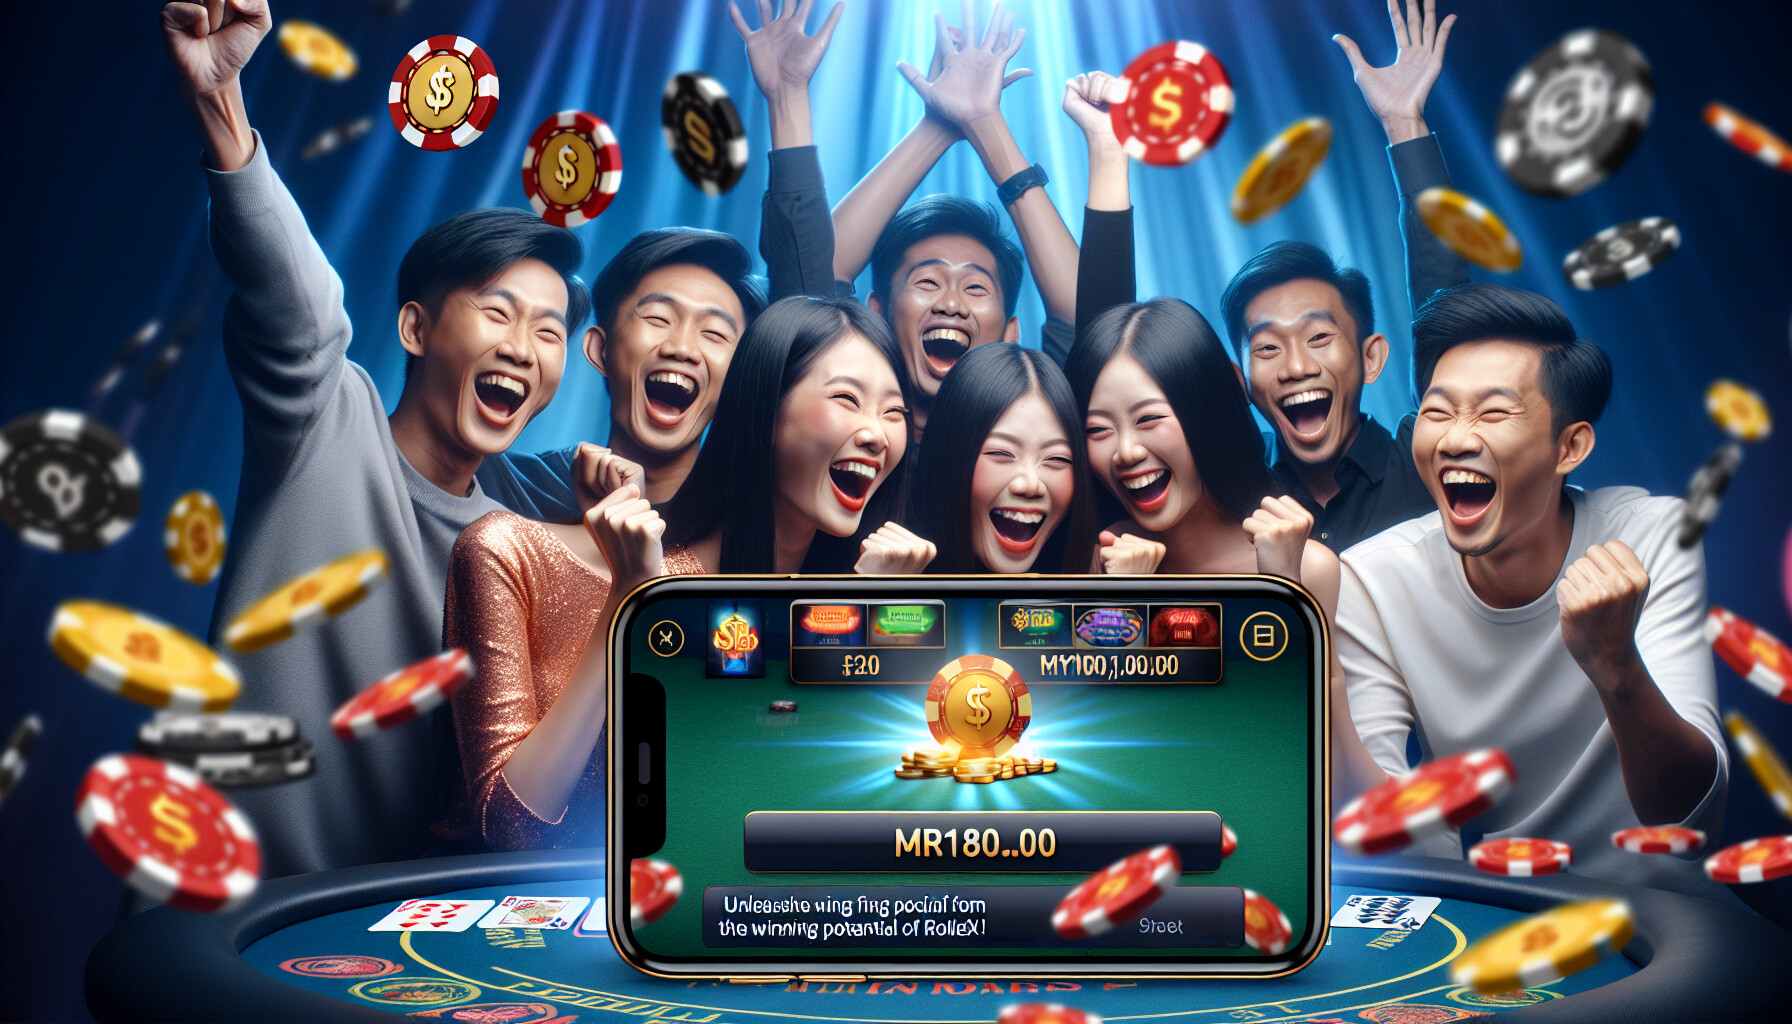 🎰💰🔥 Win big with Rollex11 and turn MYR100 into MYR1,000 in no time! Exciting slots, big payouts, and endless thrills await! Join now and start winning! 💸🎉😍 #Rollex11 #BigWins